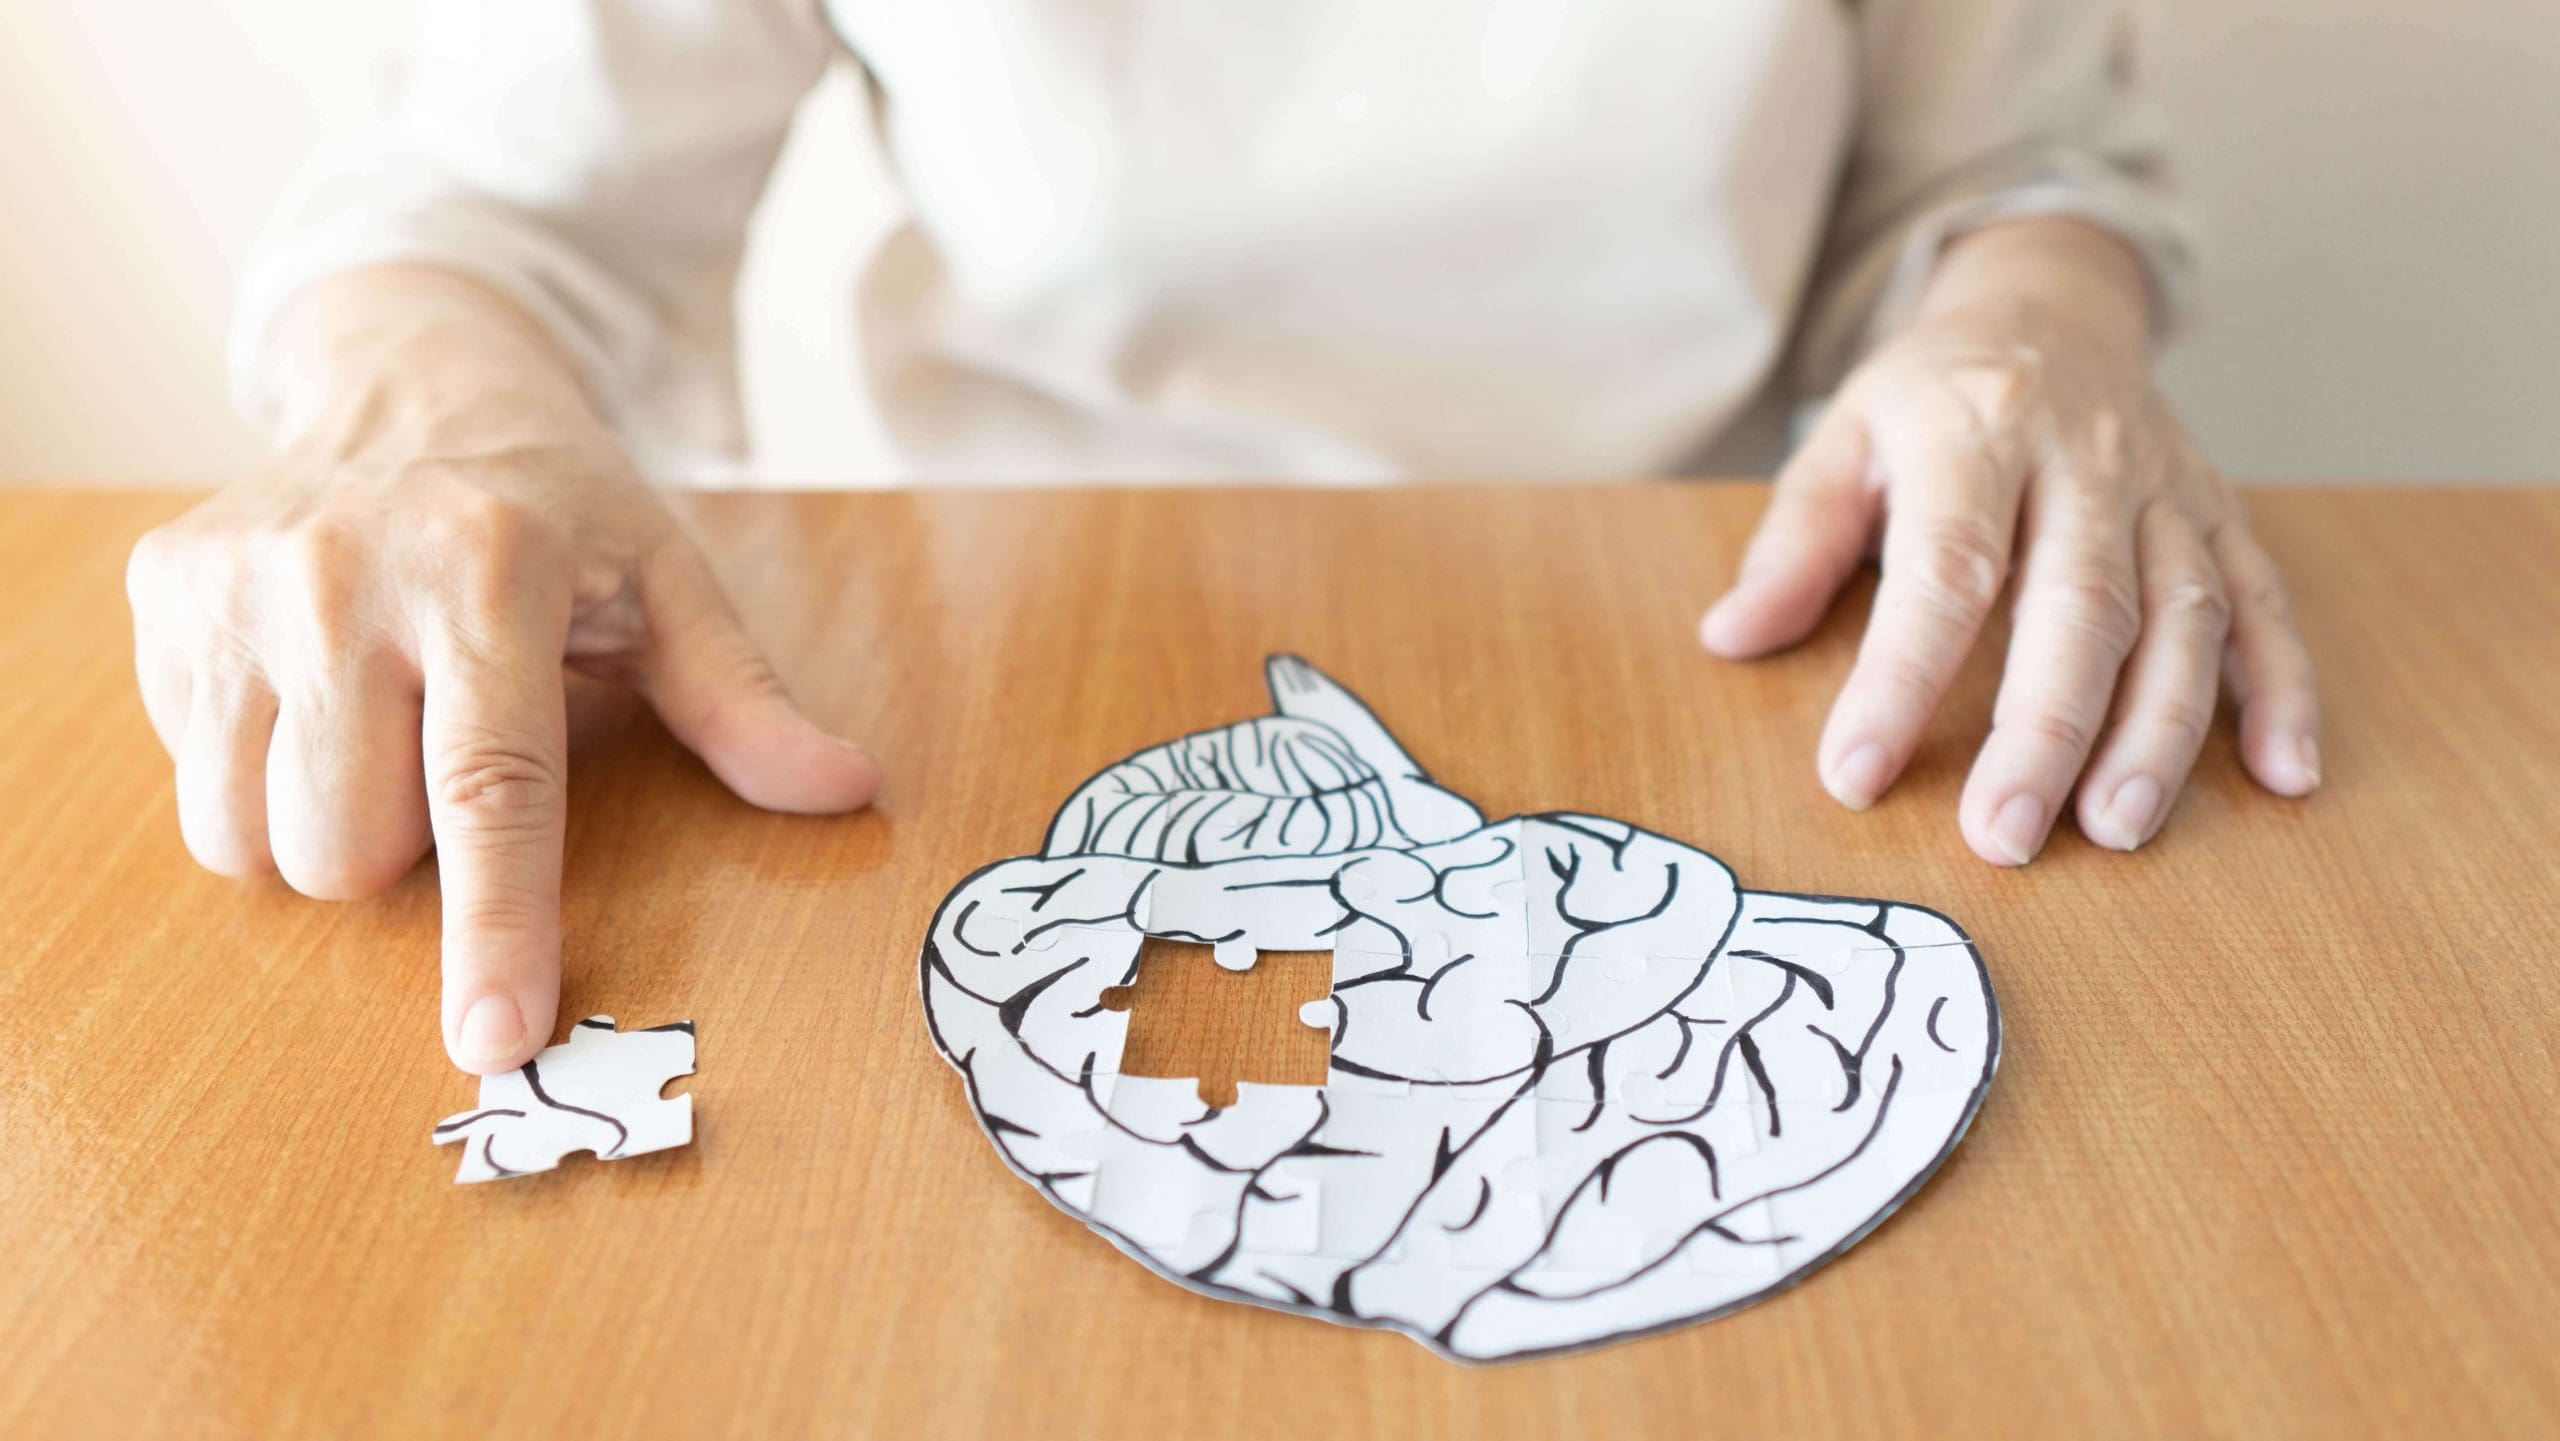 Woman putting together a puzzle of a human brain